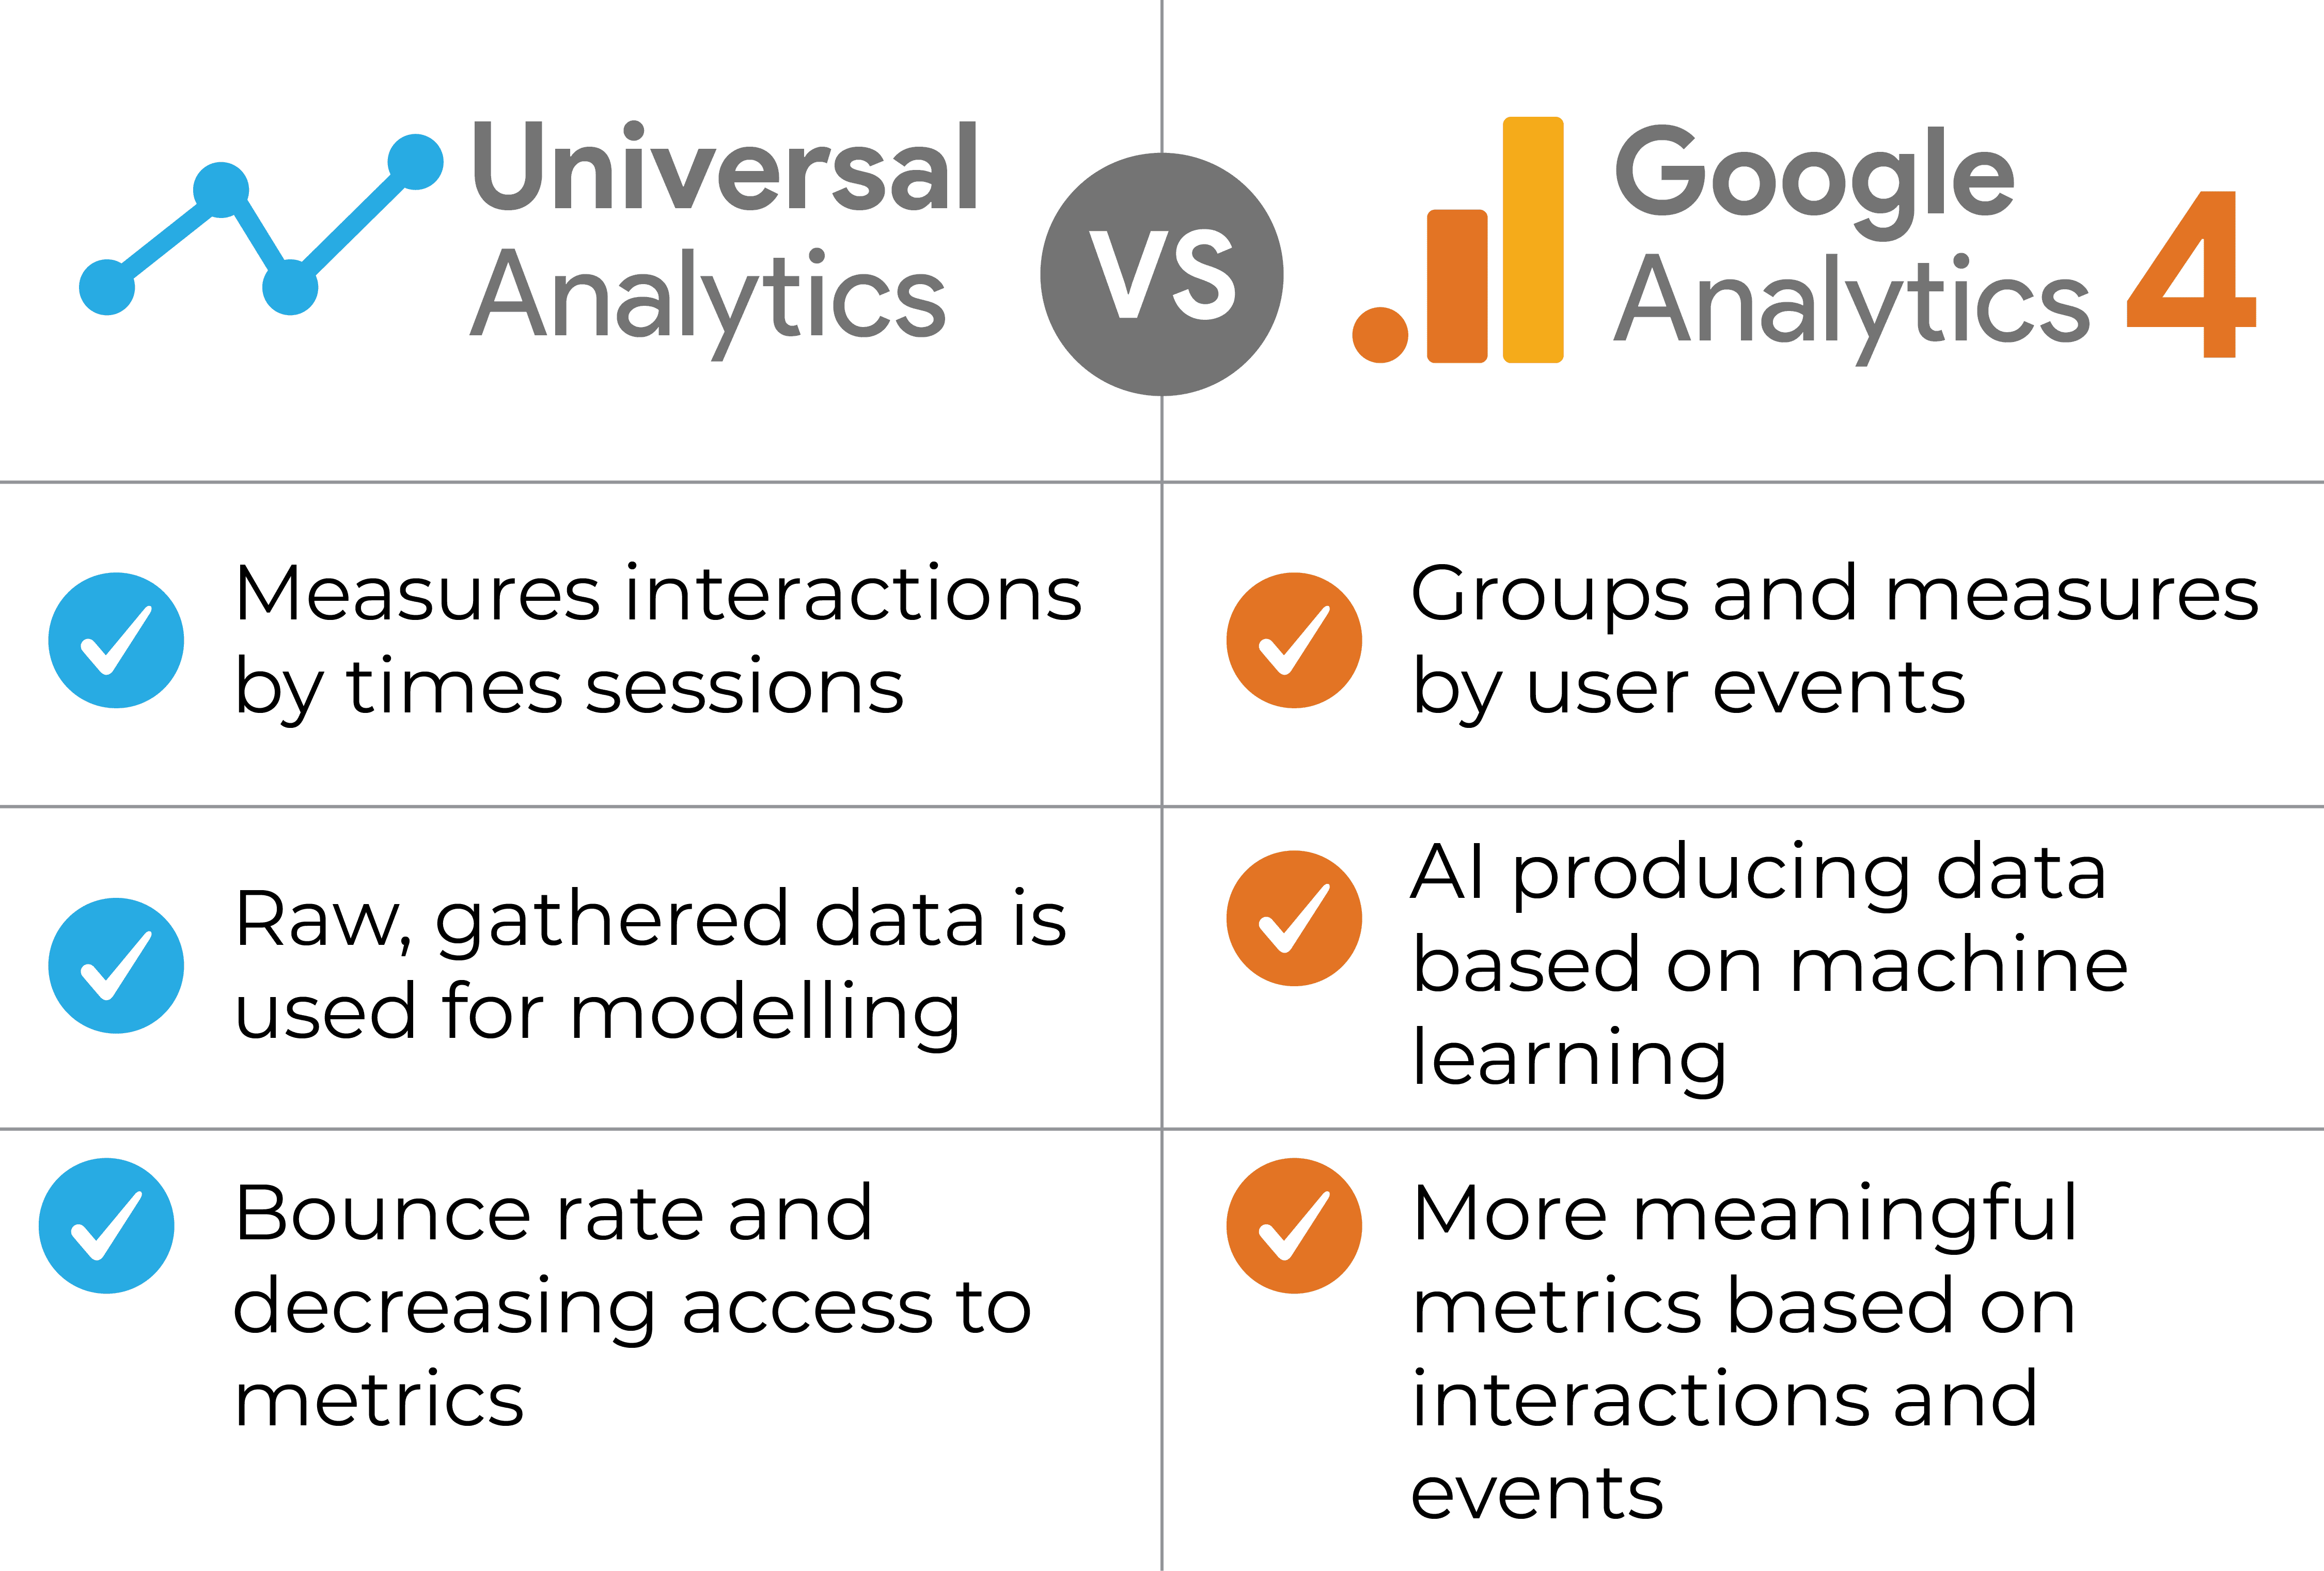 A table summarises the differences between UA and GA4. GA4 has more advanced metrics and data analytics..